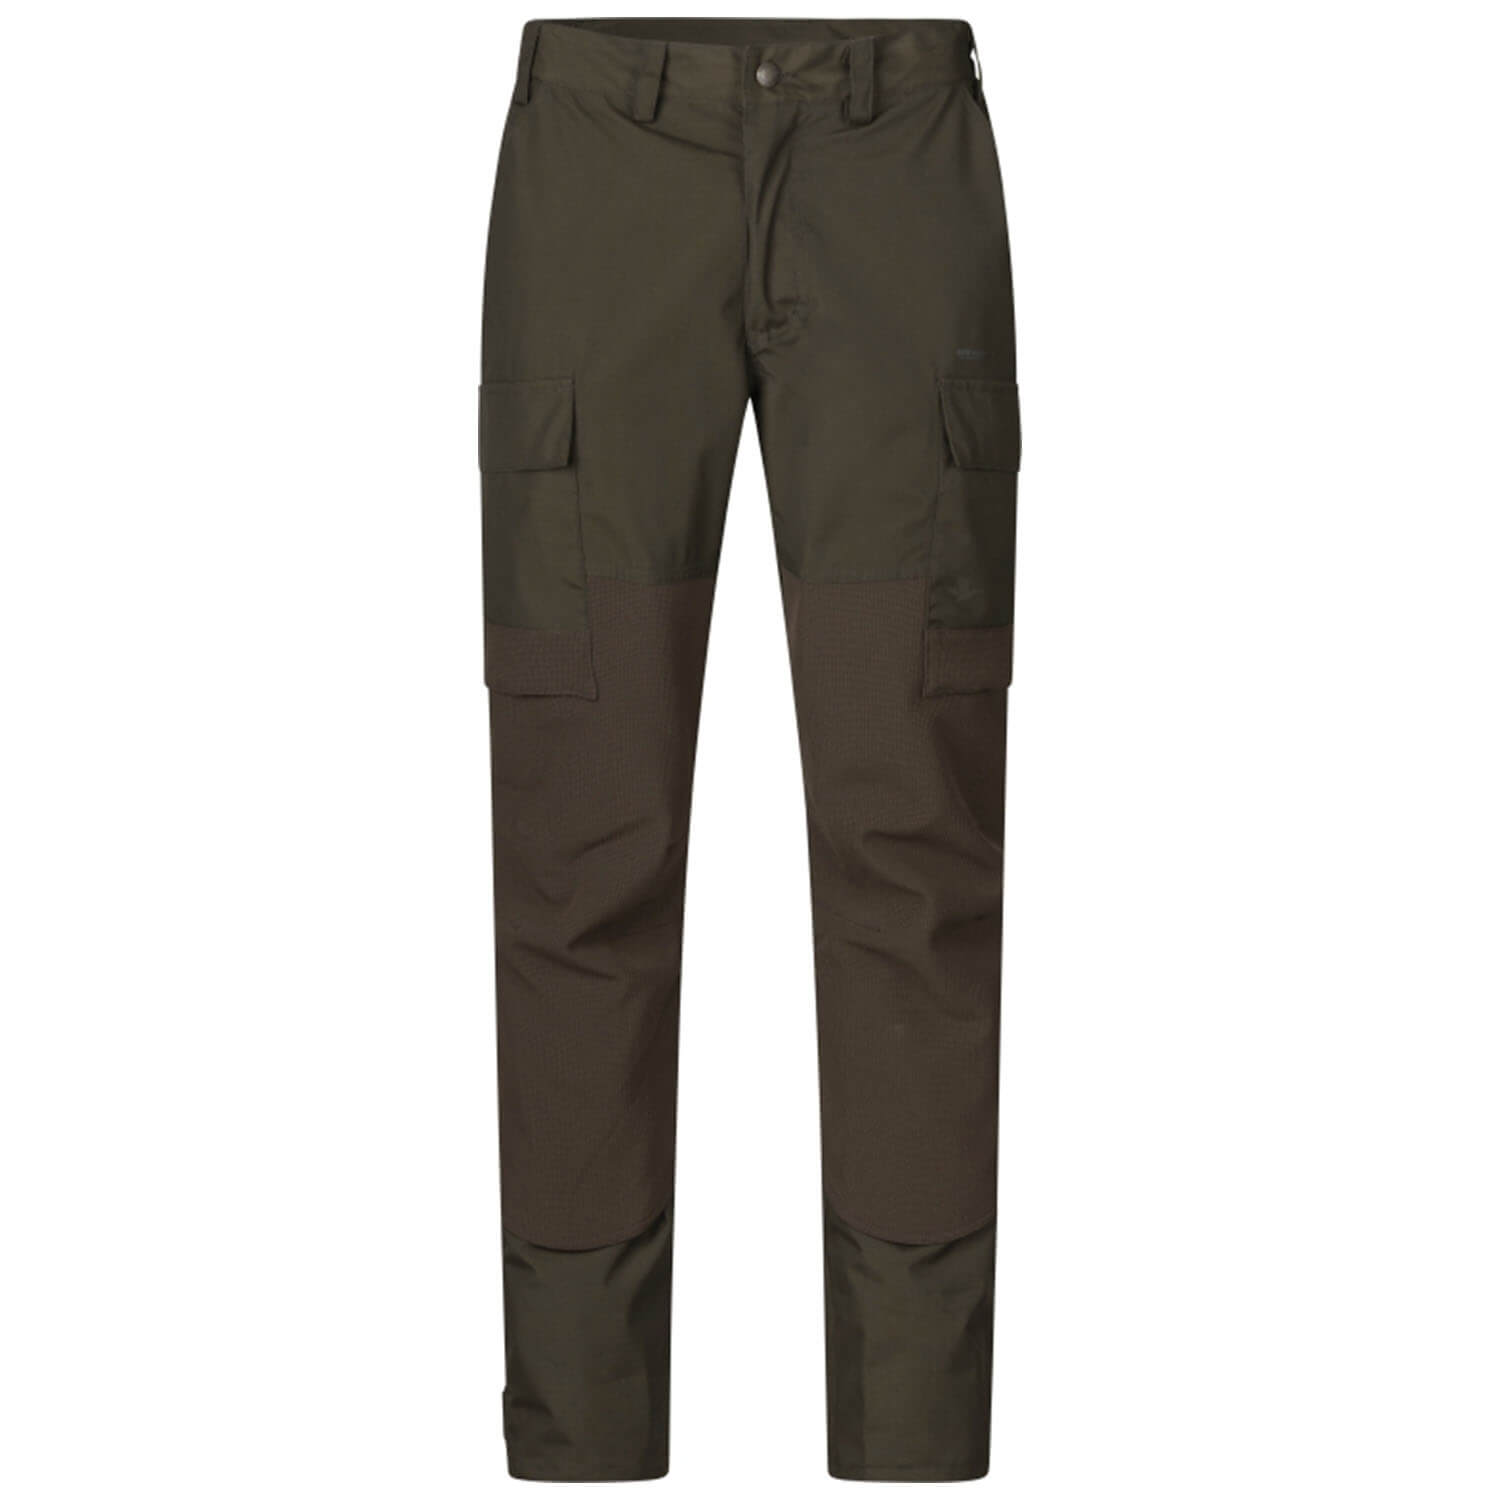 Seeland hunting pants Arden (pine green) - Sale